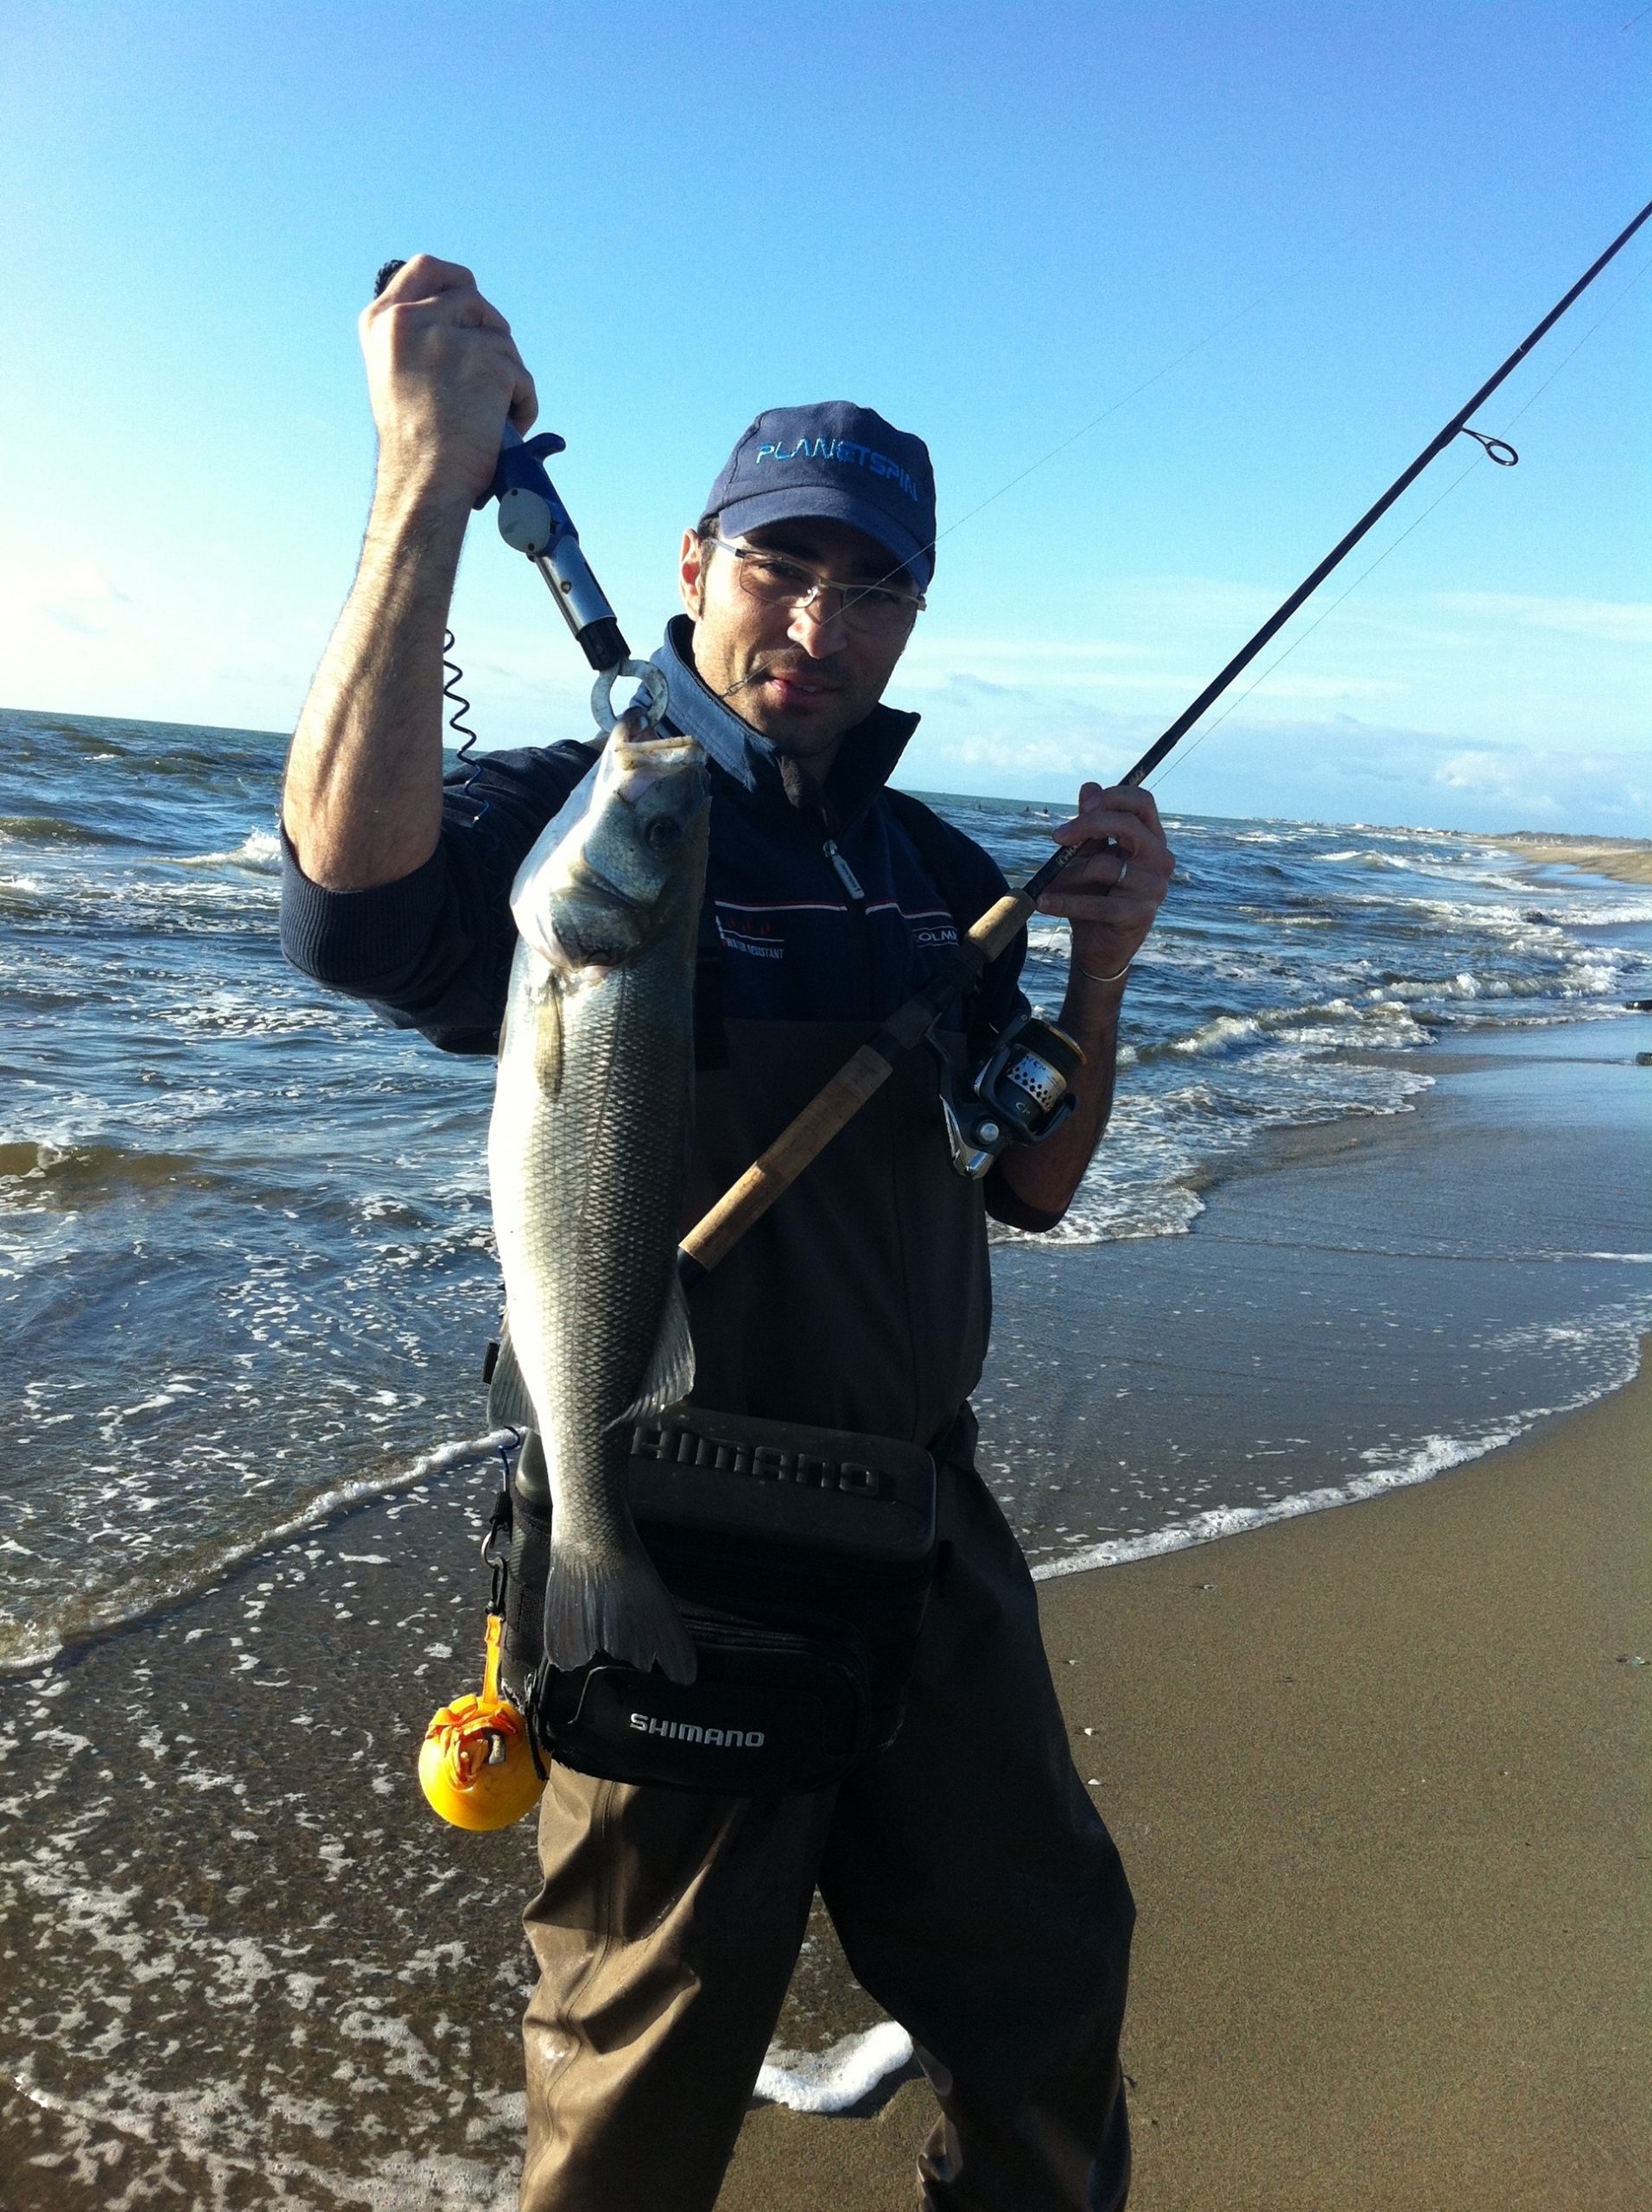 Pesca a spinning in mare, i punti fondamentali - Planetspin